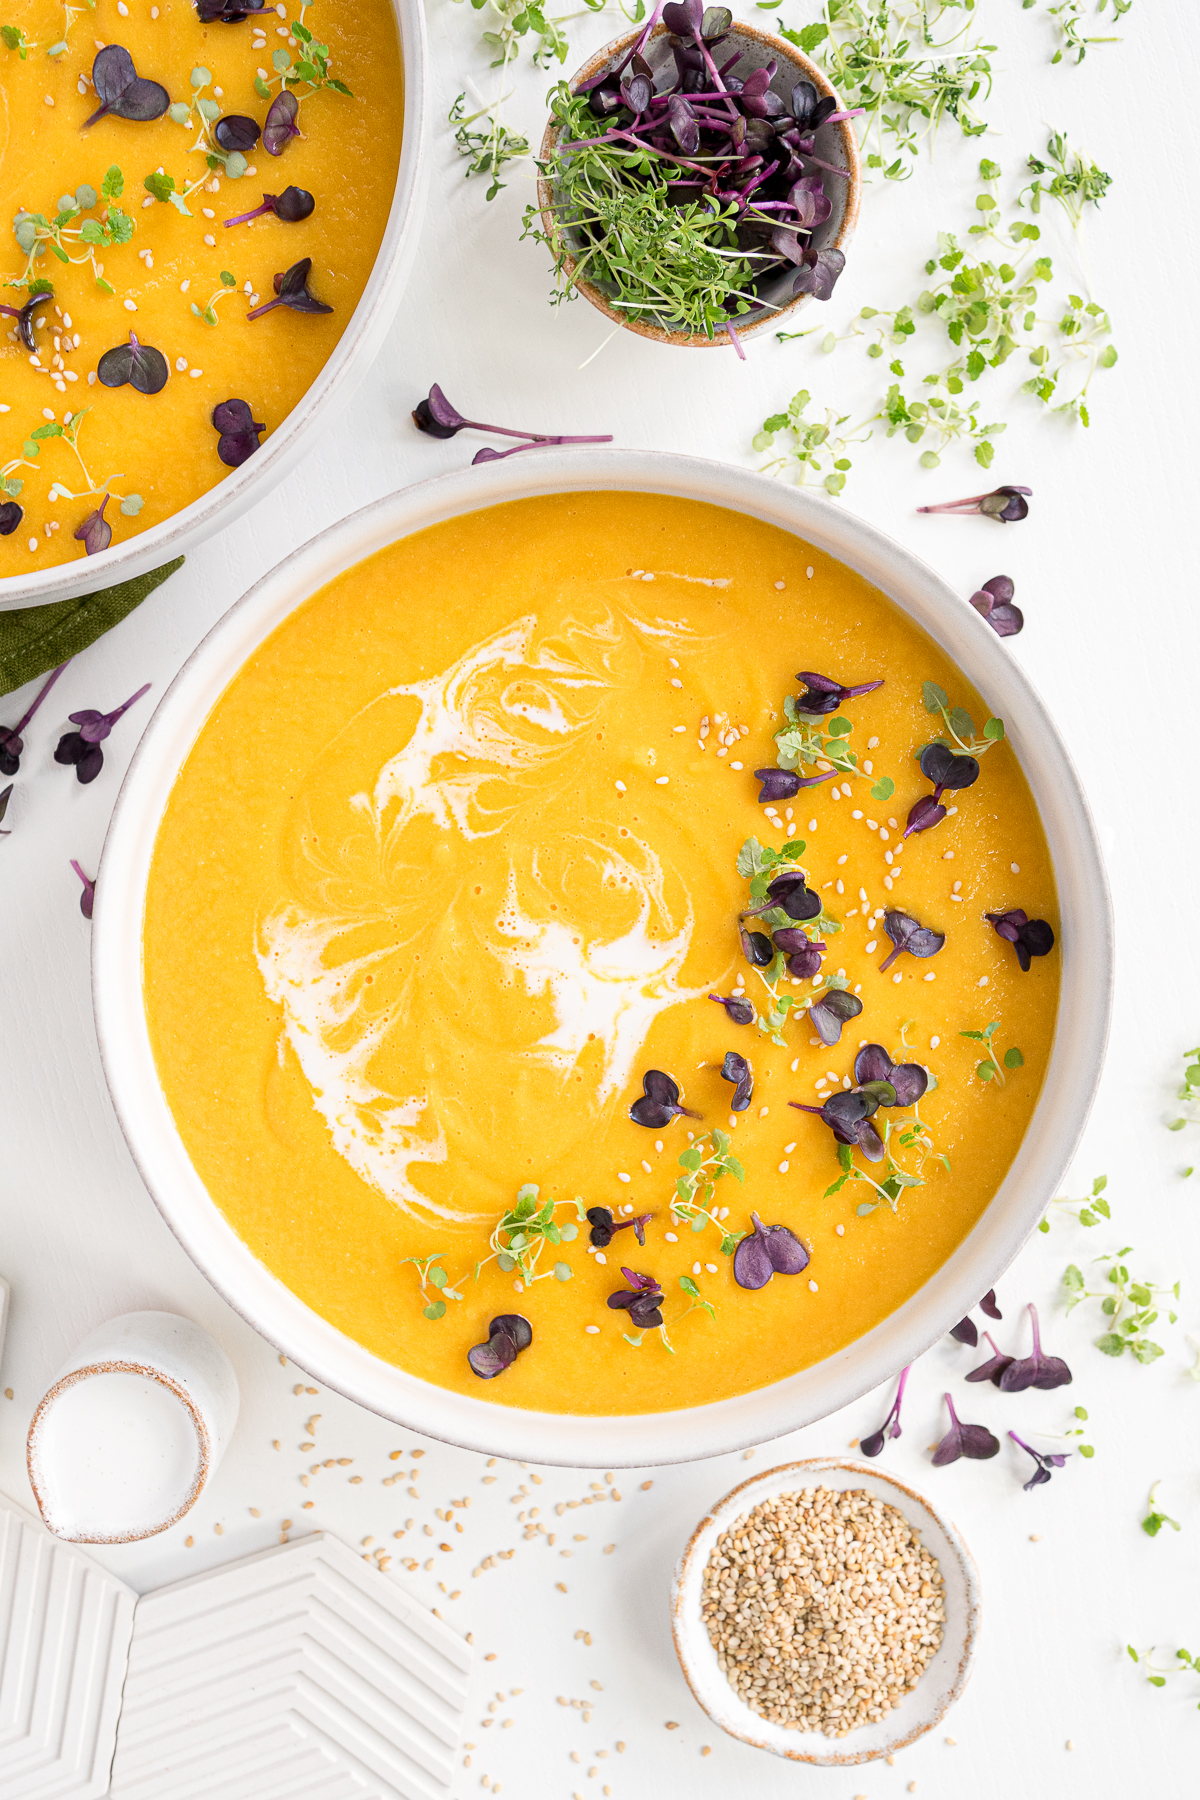 Bowl of vegan carrot ginger soup on the table with creamy swirls and microgreens for garnish.